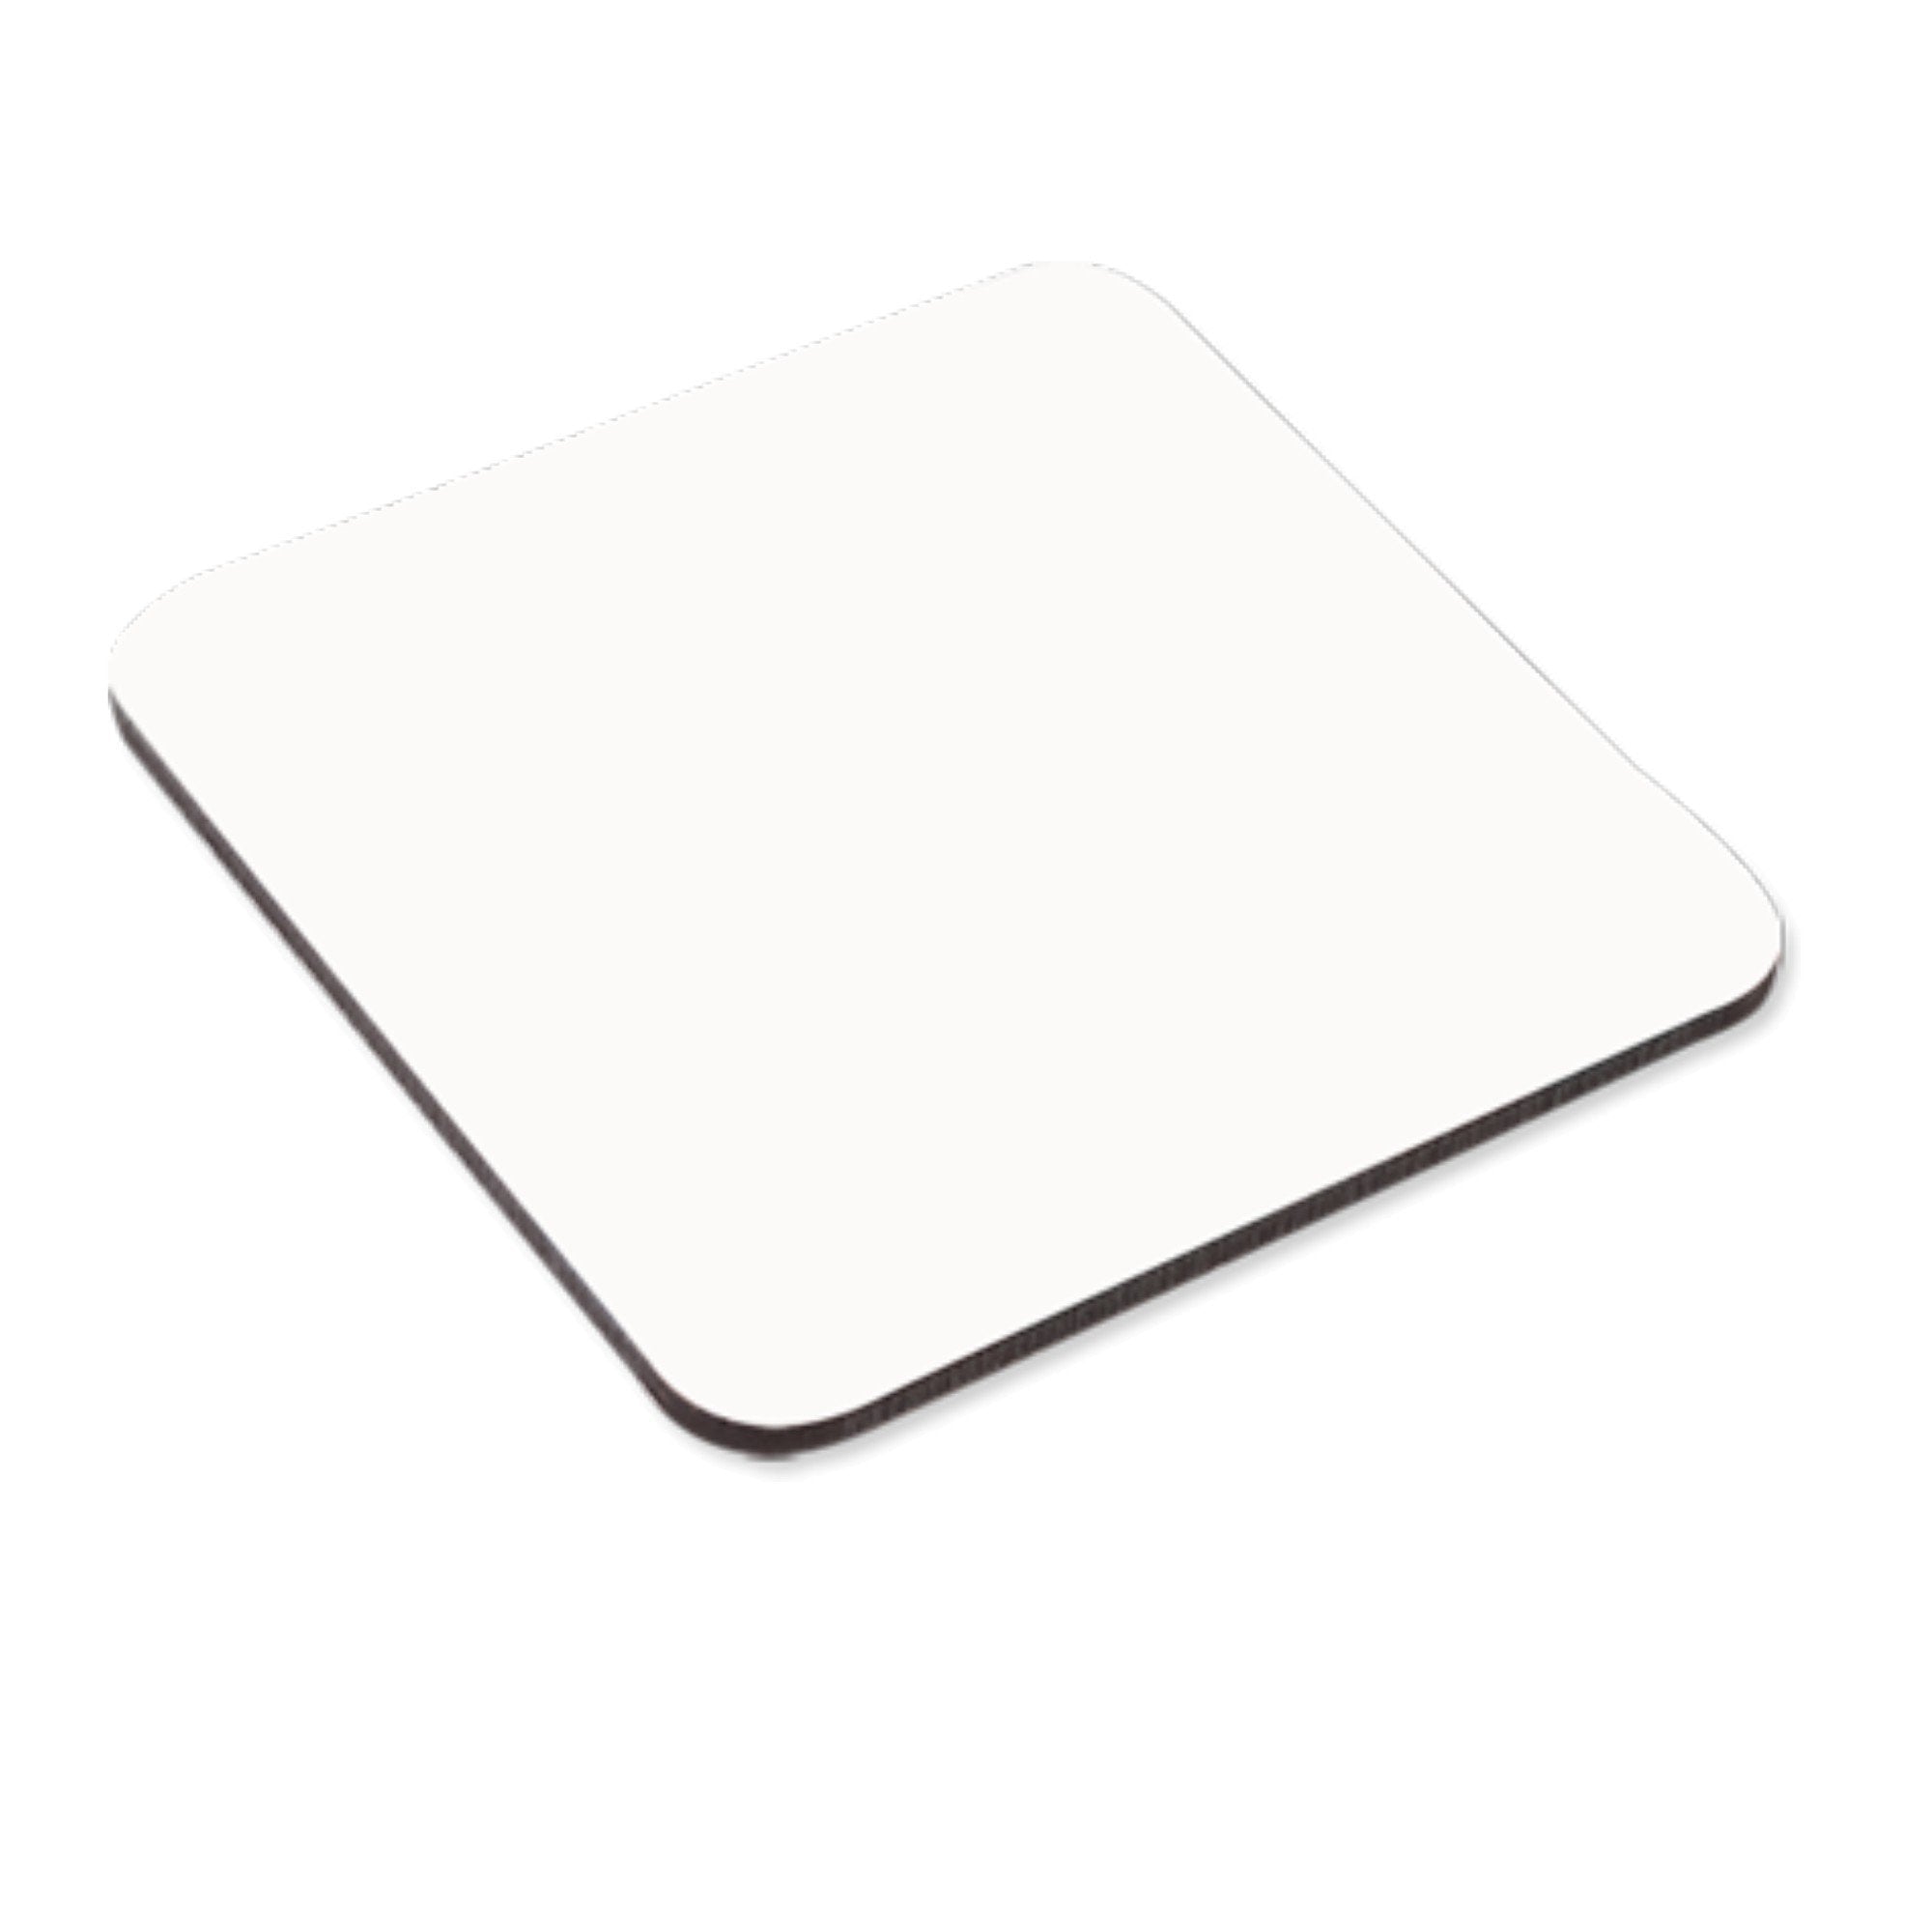 12 Packs: 4 ct. (48 total) 3.7 Square Sublimation Coasters by Make Market®  